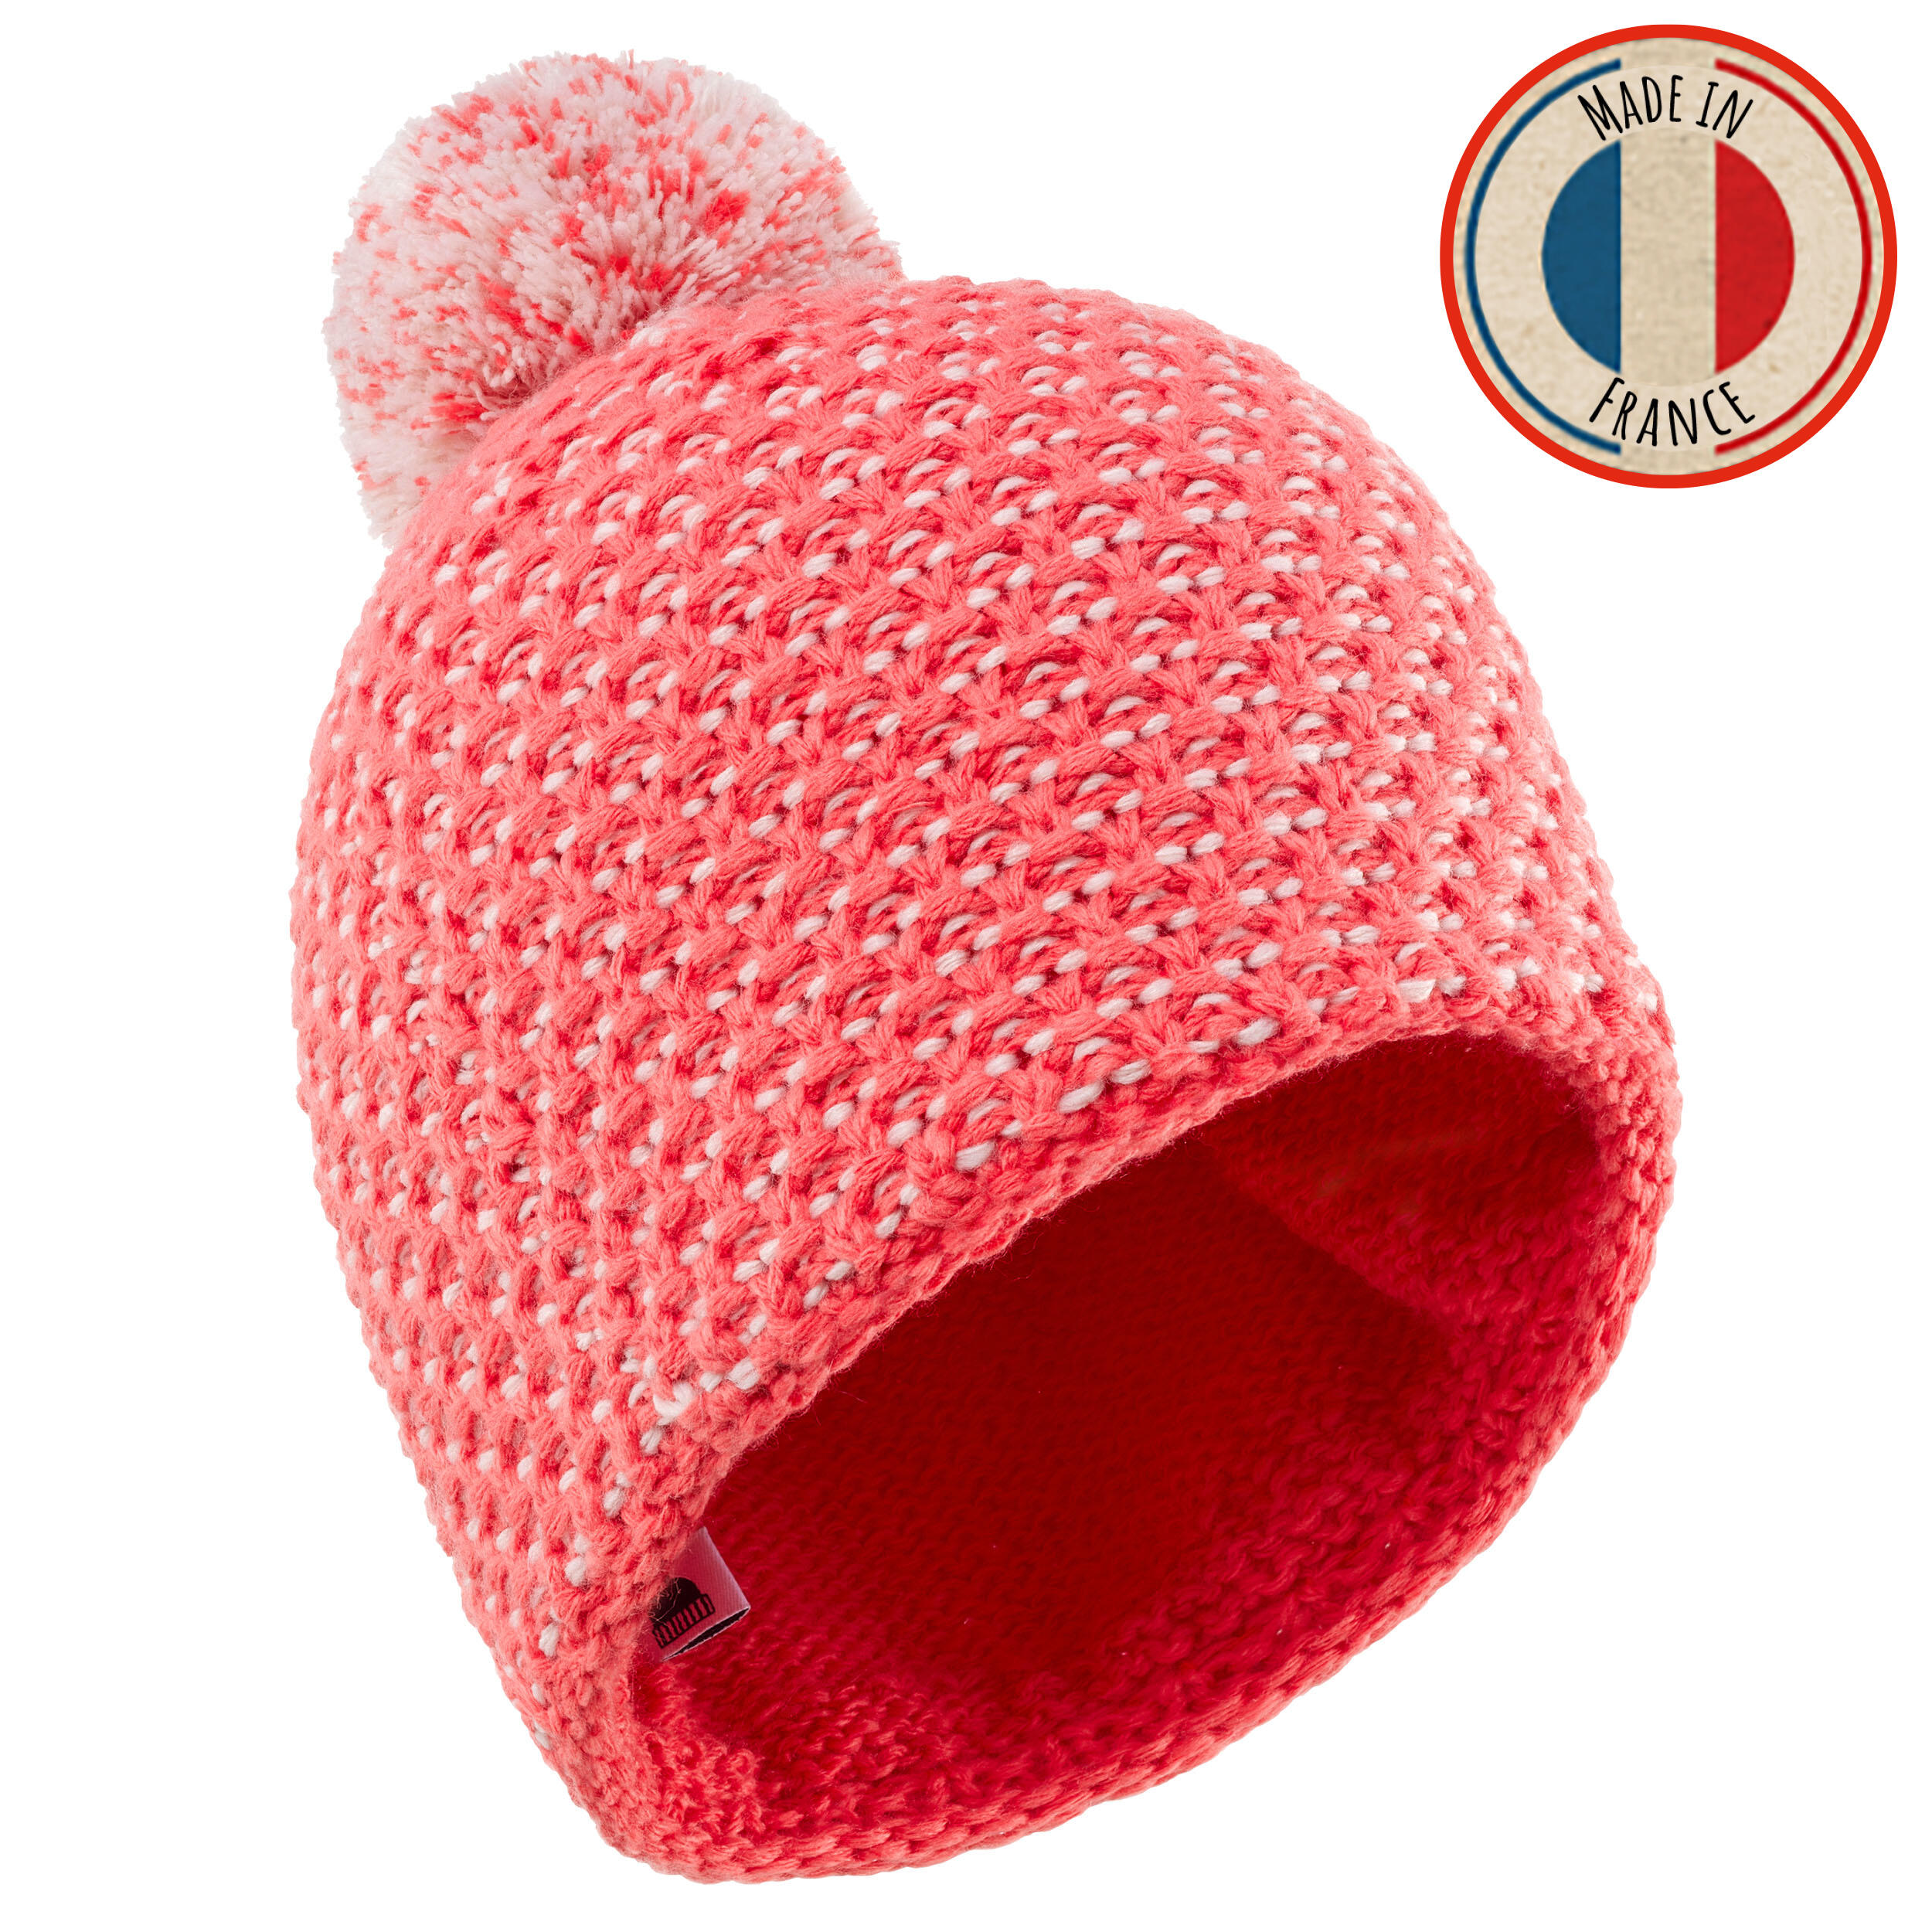 WEDZE ADULT  SKI HAT MADE IN FRANCE - TIMELESS - CORAL